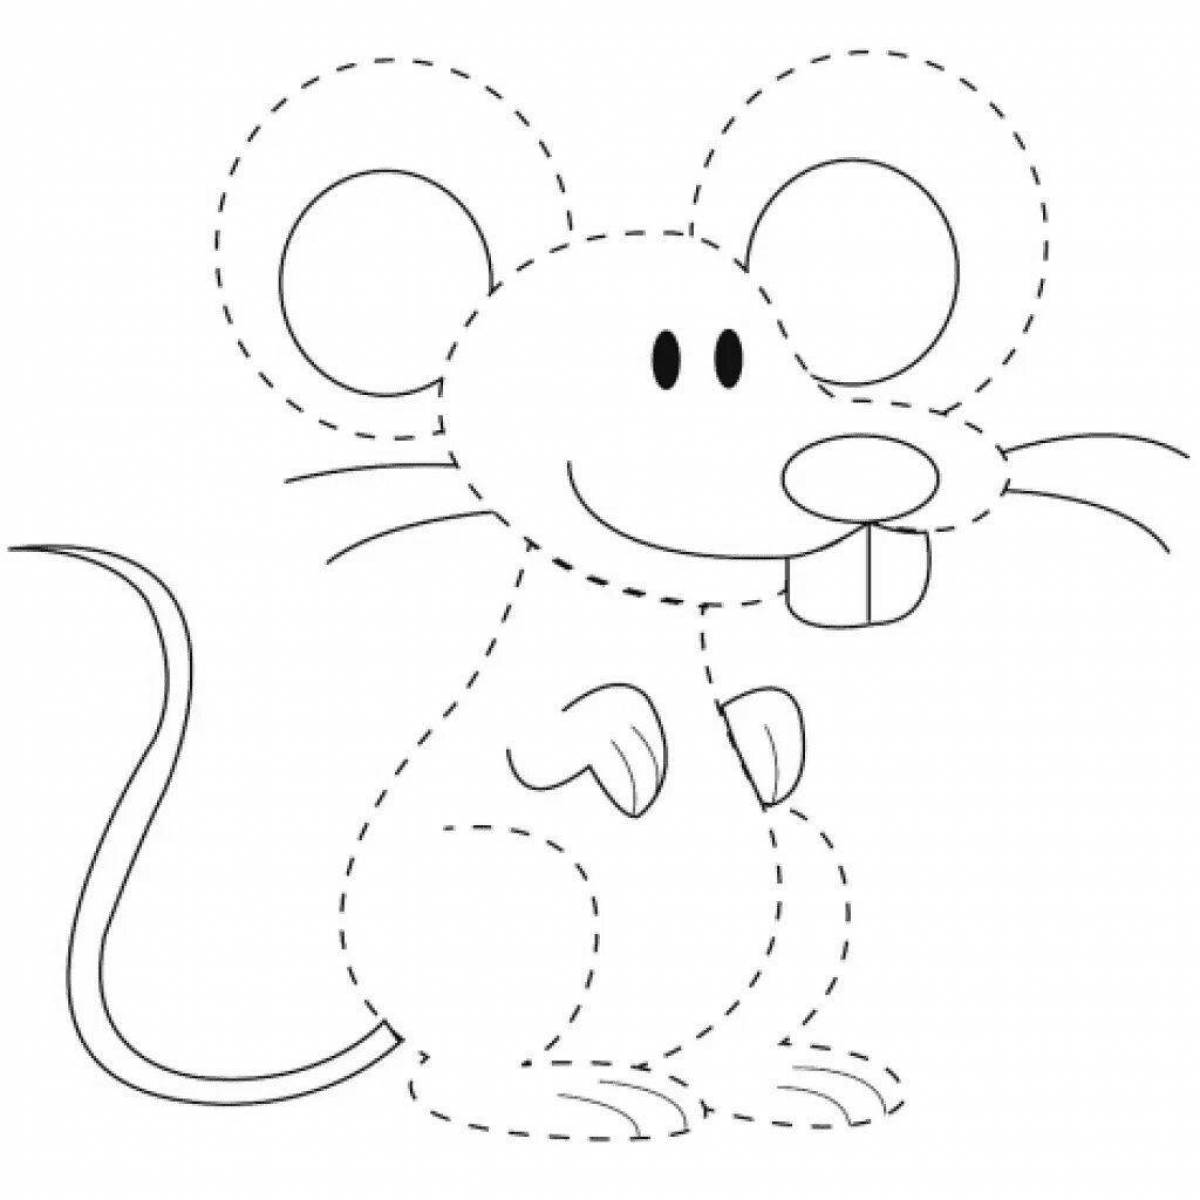 Bright coloring mouse for children 2-3 years old